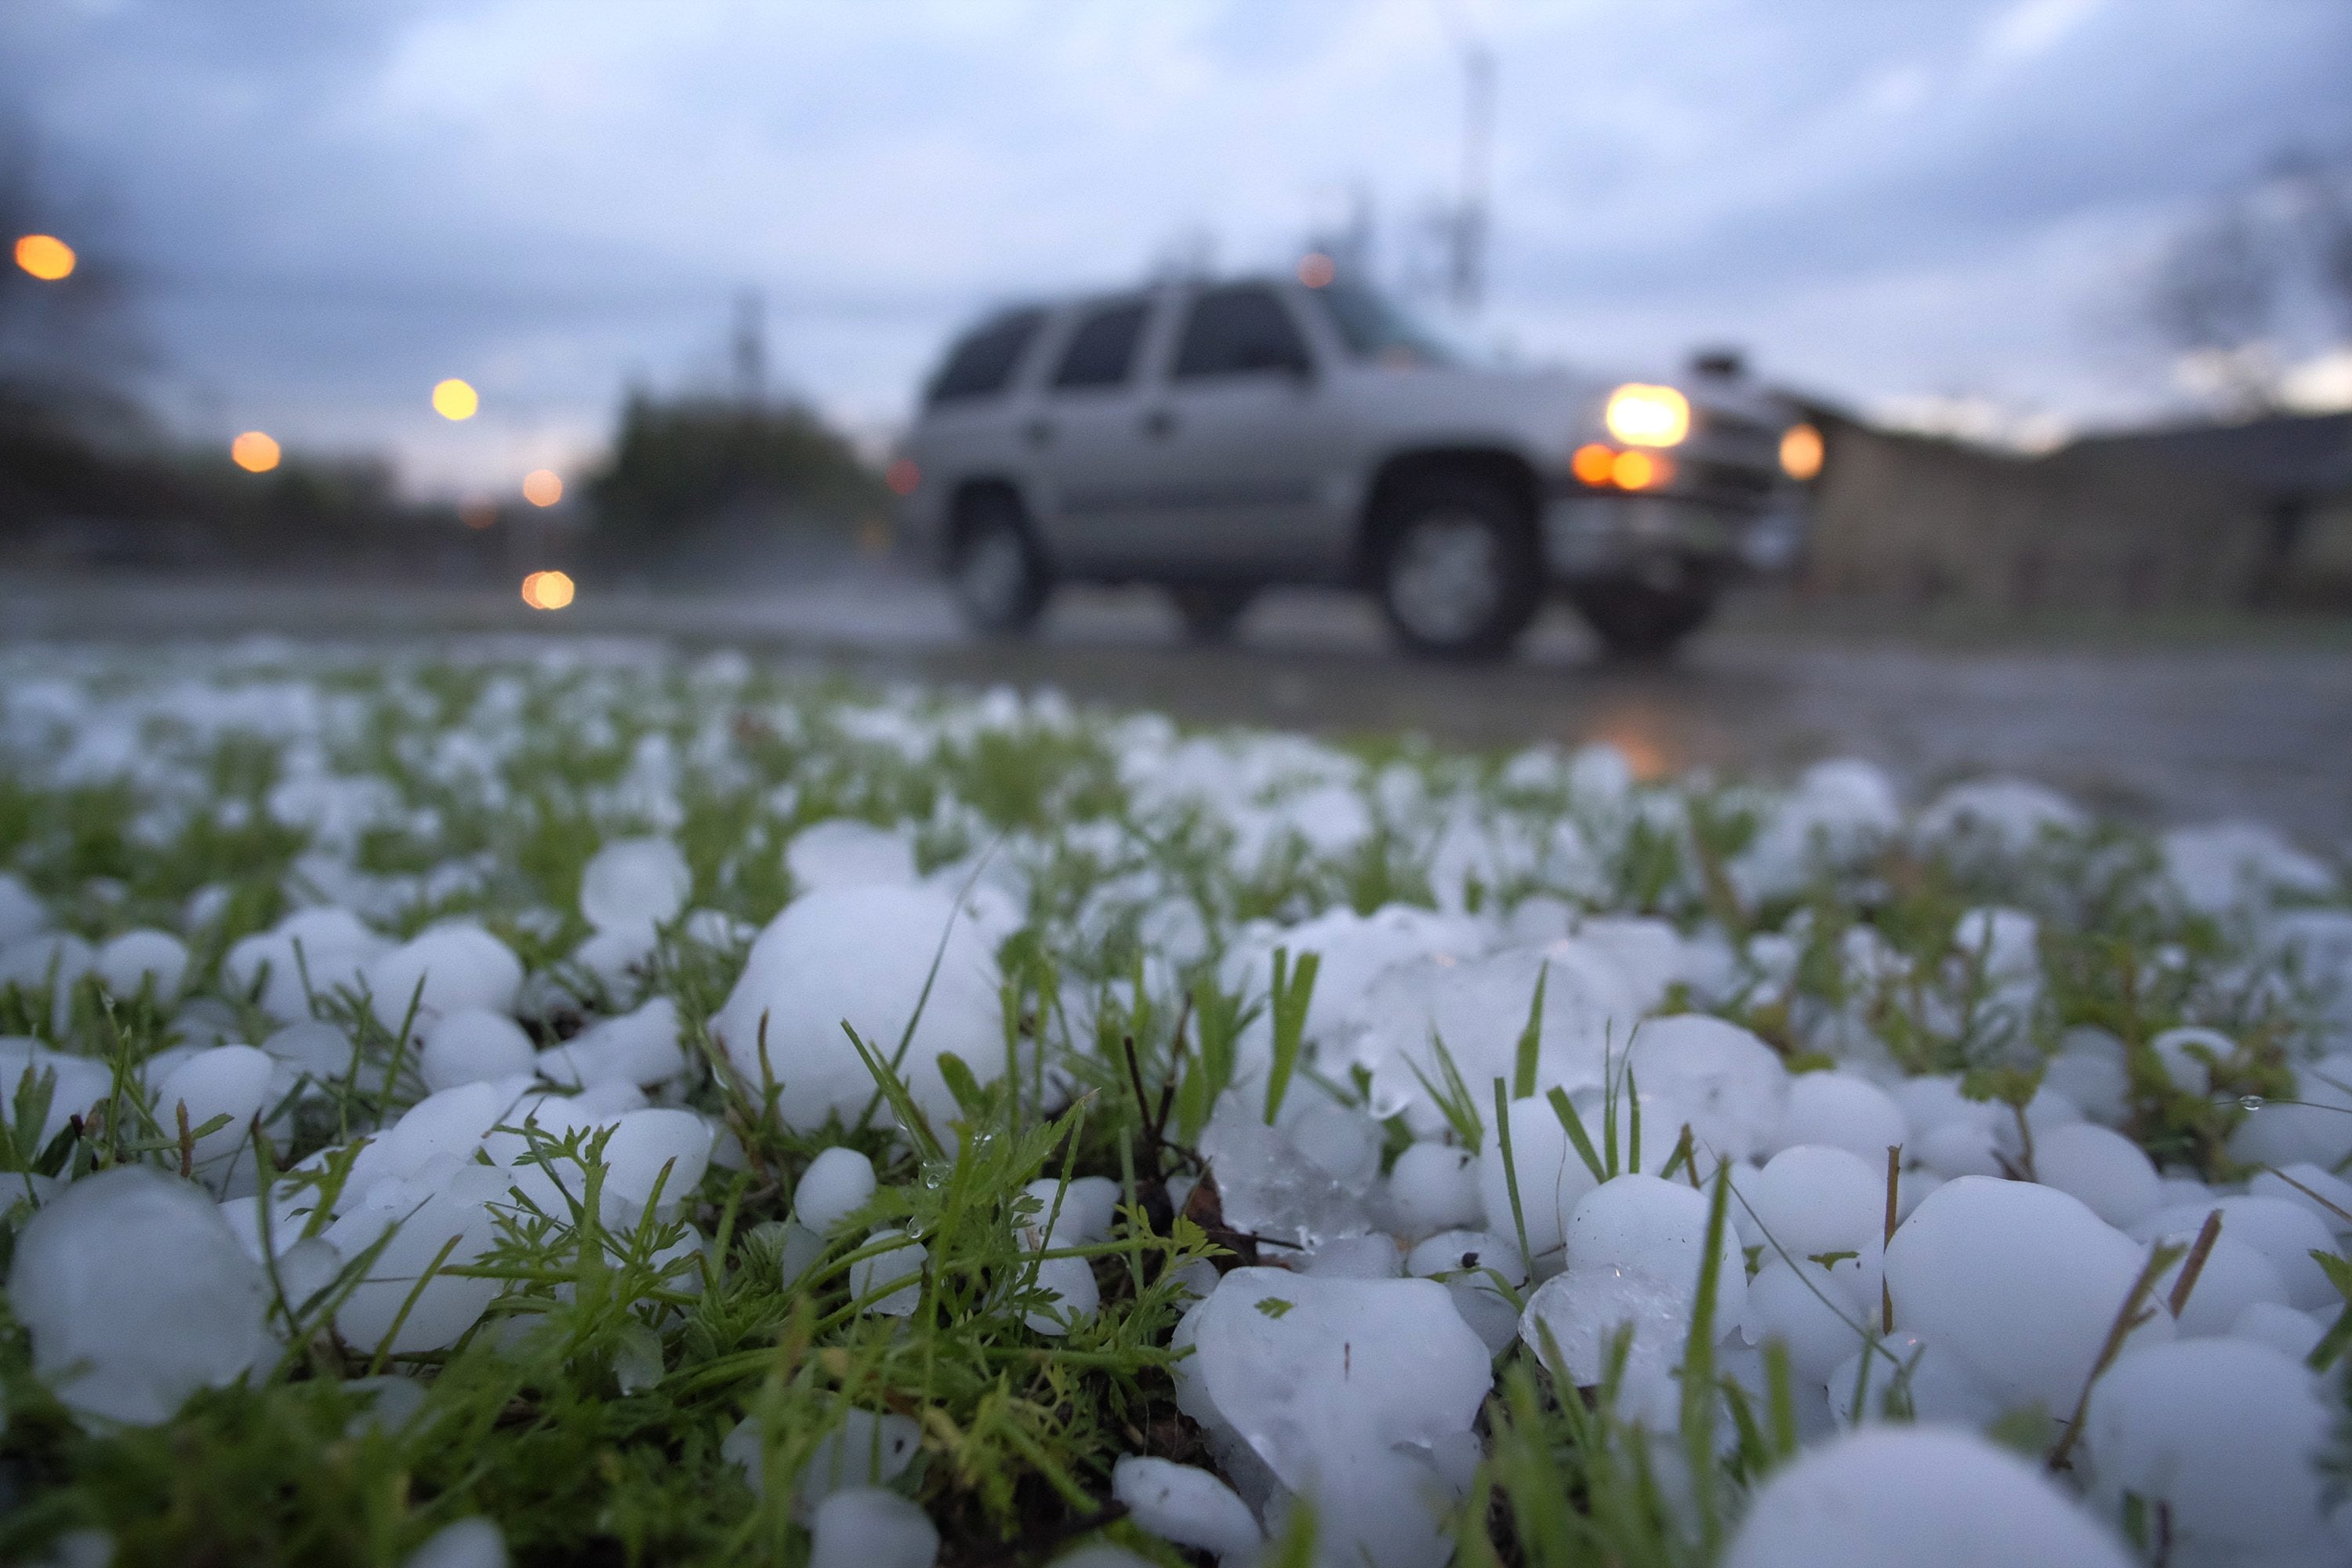 A vehicle drives by a field covered with hail early Thursday in Fort Worth, Texas.